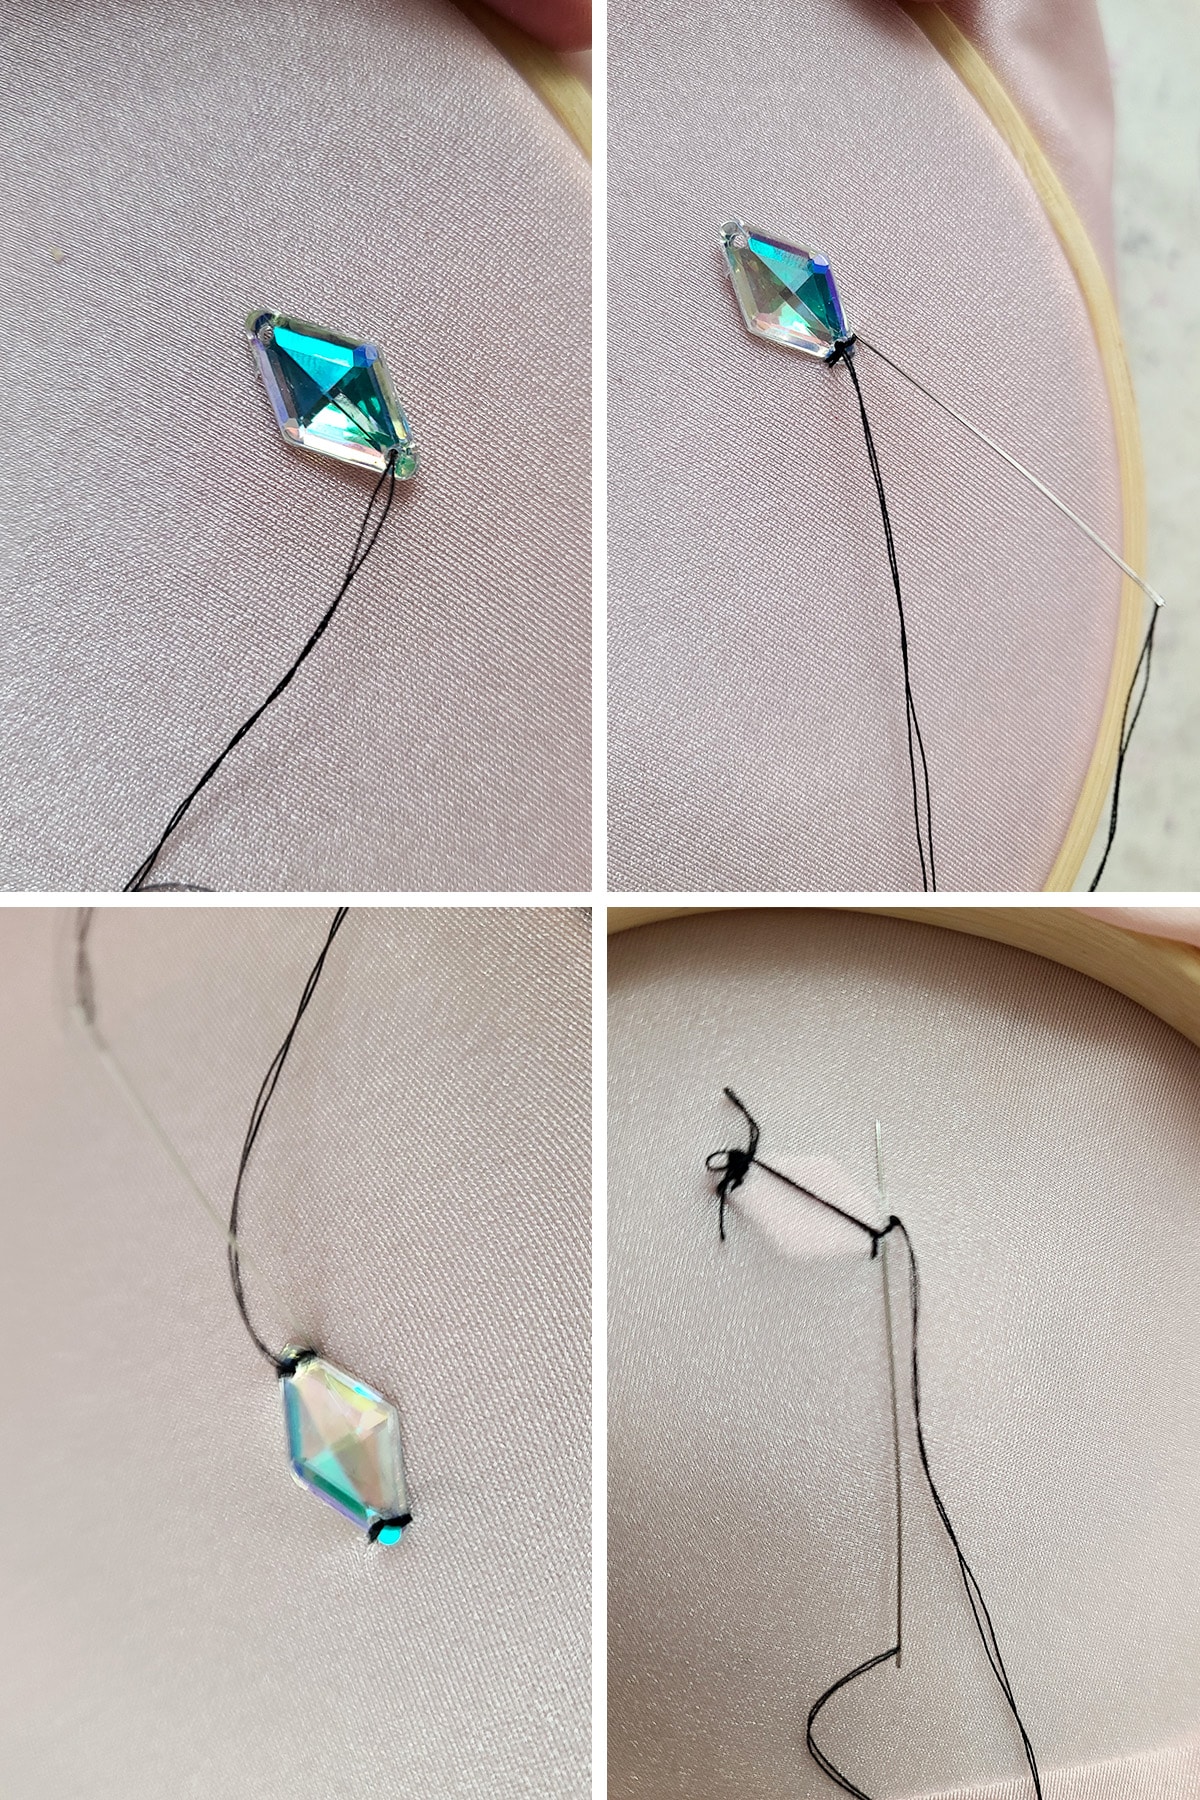 A 4 part compilation image showing black thread being used to sew a diamond shaped rhinestone to some light pink spandex.